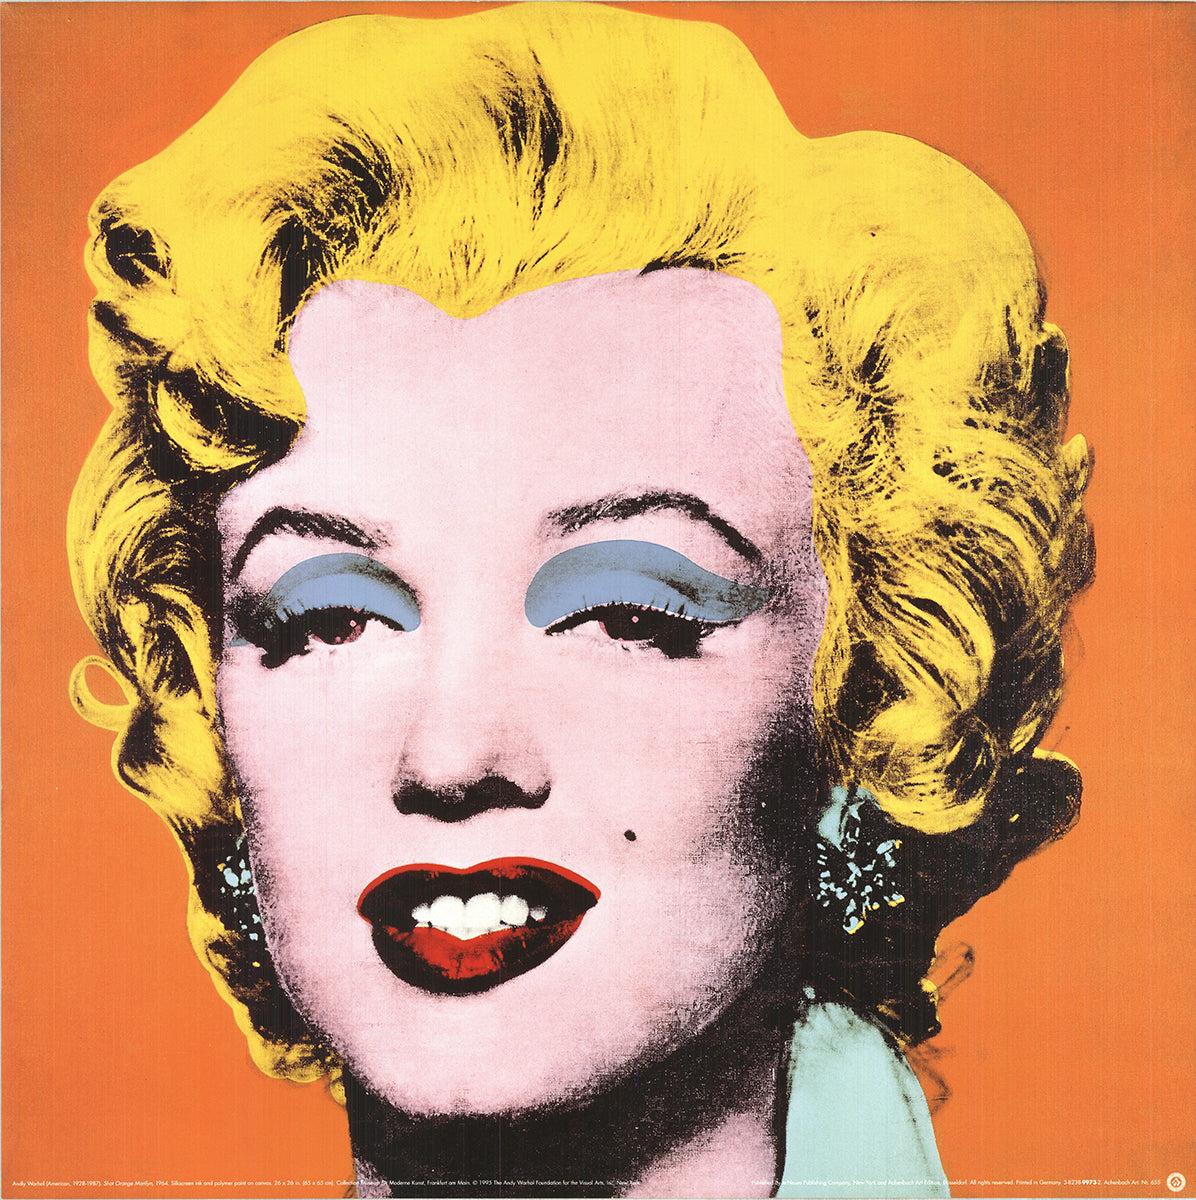 Paper Size: 25.5 x 25.5 inches ( 64.77 x 64.77 cm )
Image Size: 25.5 x 25.5 inches ( 64.77 x 64.77 cm )
Framed: No
Condition: A: Mint

Additional Details: Marilyn Orange by Andy Warhol, printed in 1995, published by Te neues Publishing in Kempen,